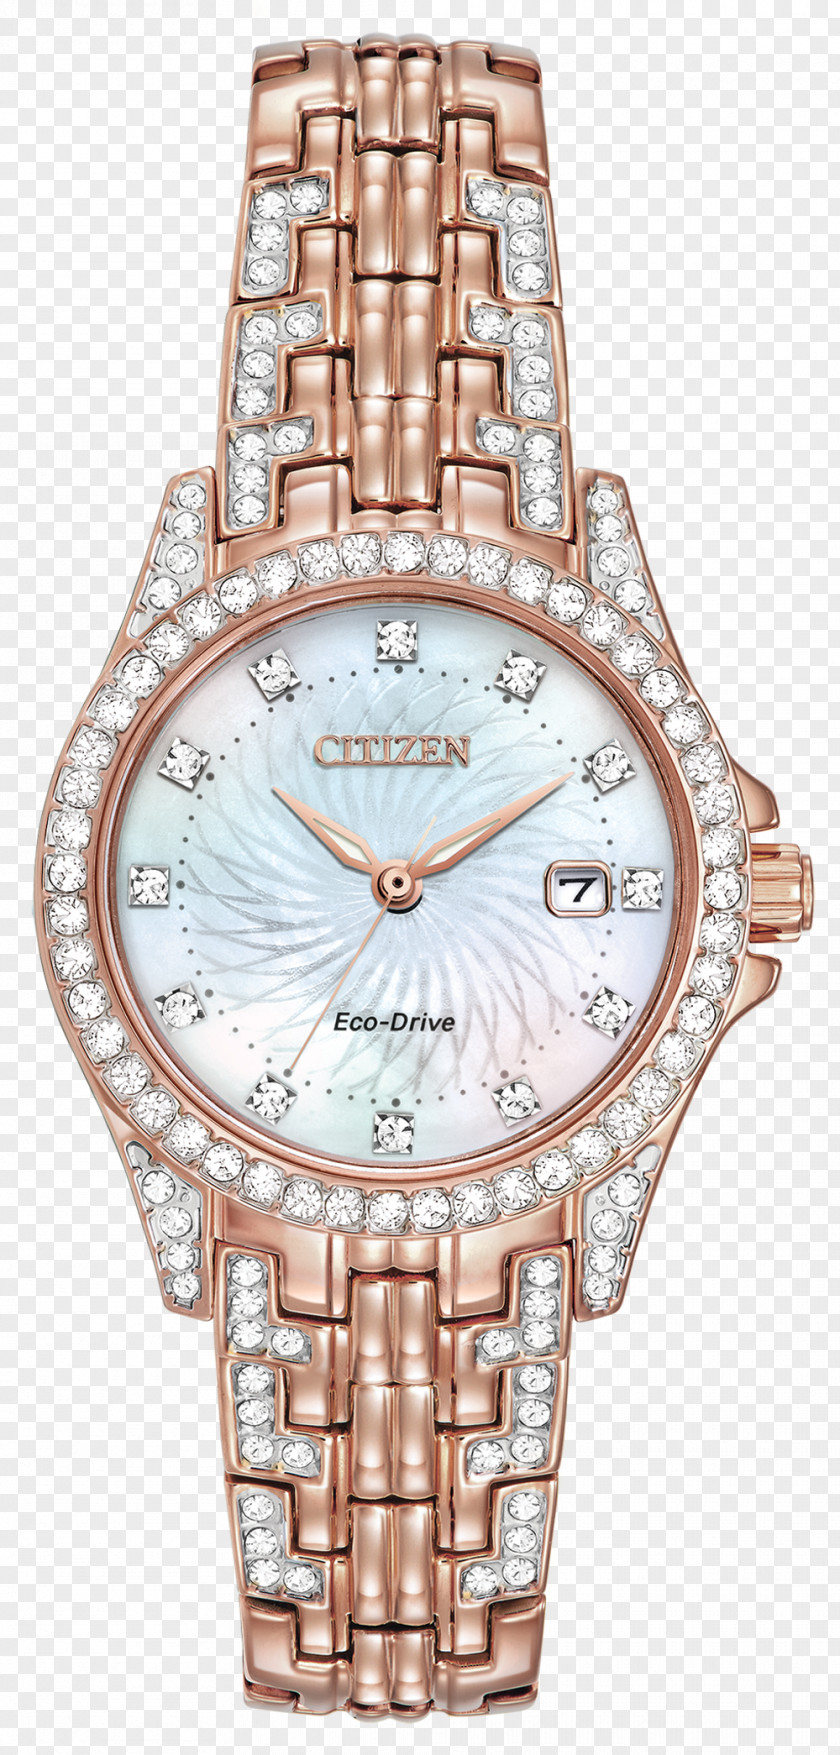 Watch Eco-Drive Citizen Holdings Jewellery Swarovski AG PNG